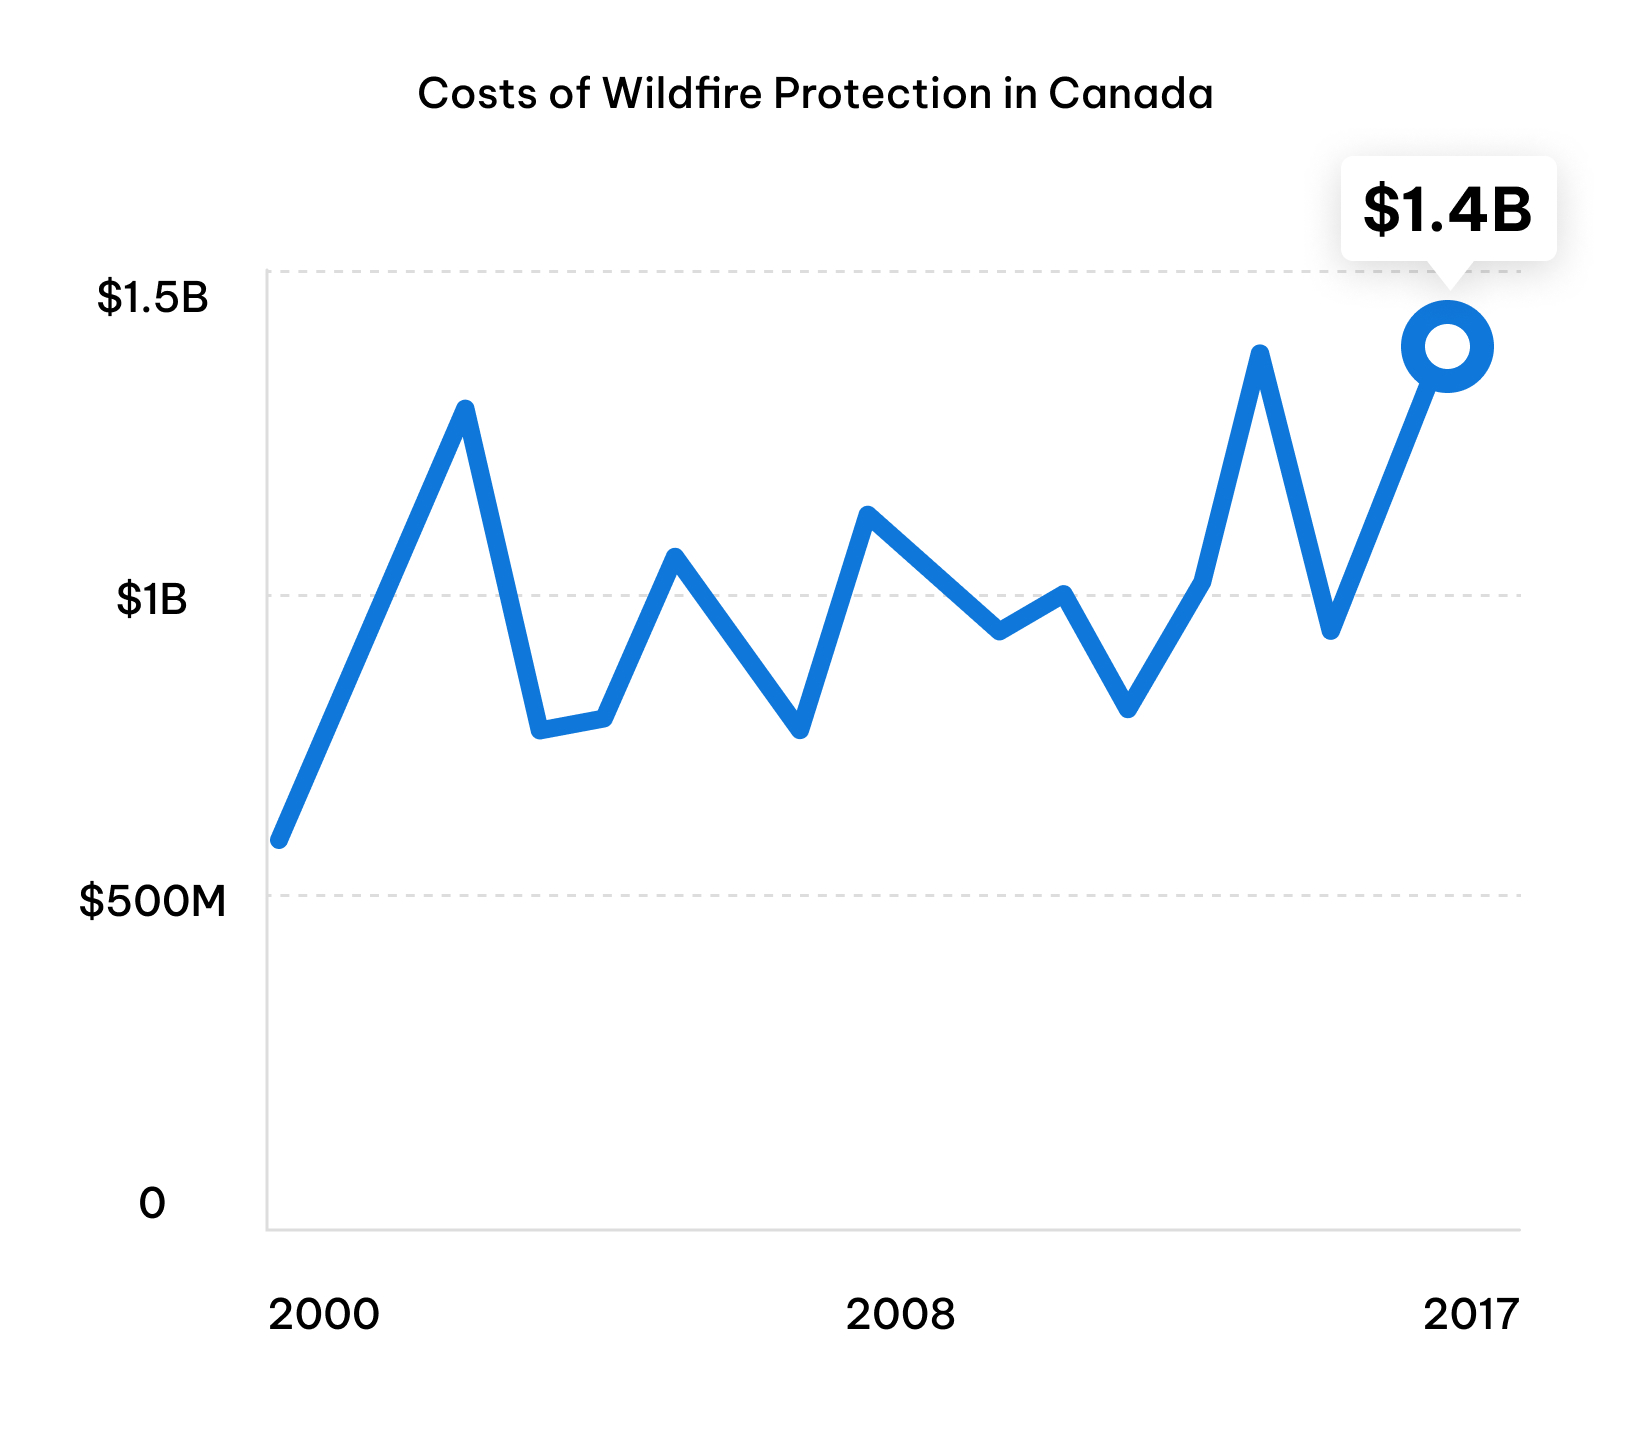 Costs-of-Wildfire-Protection-Canada